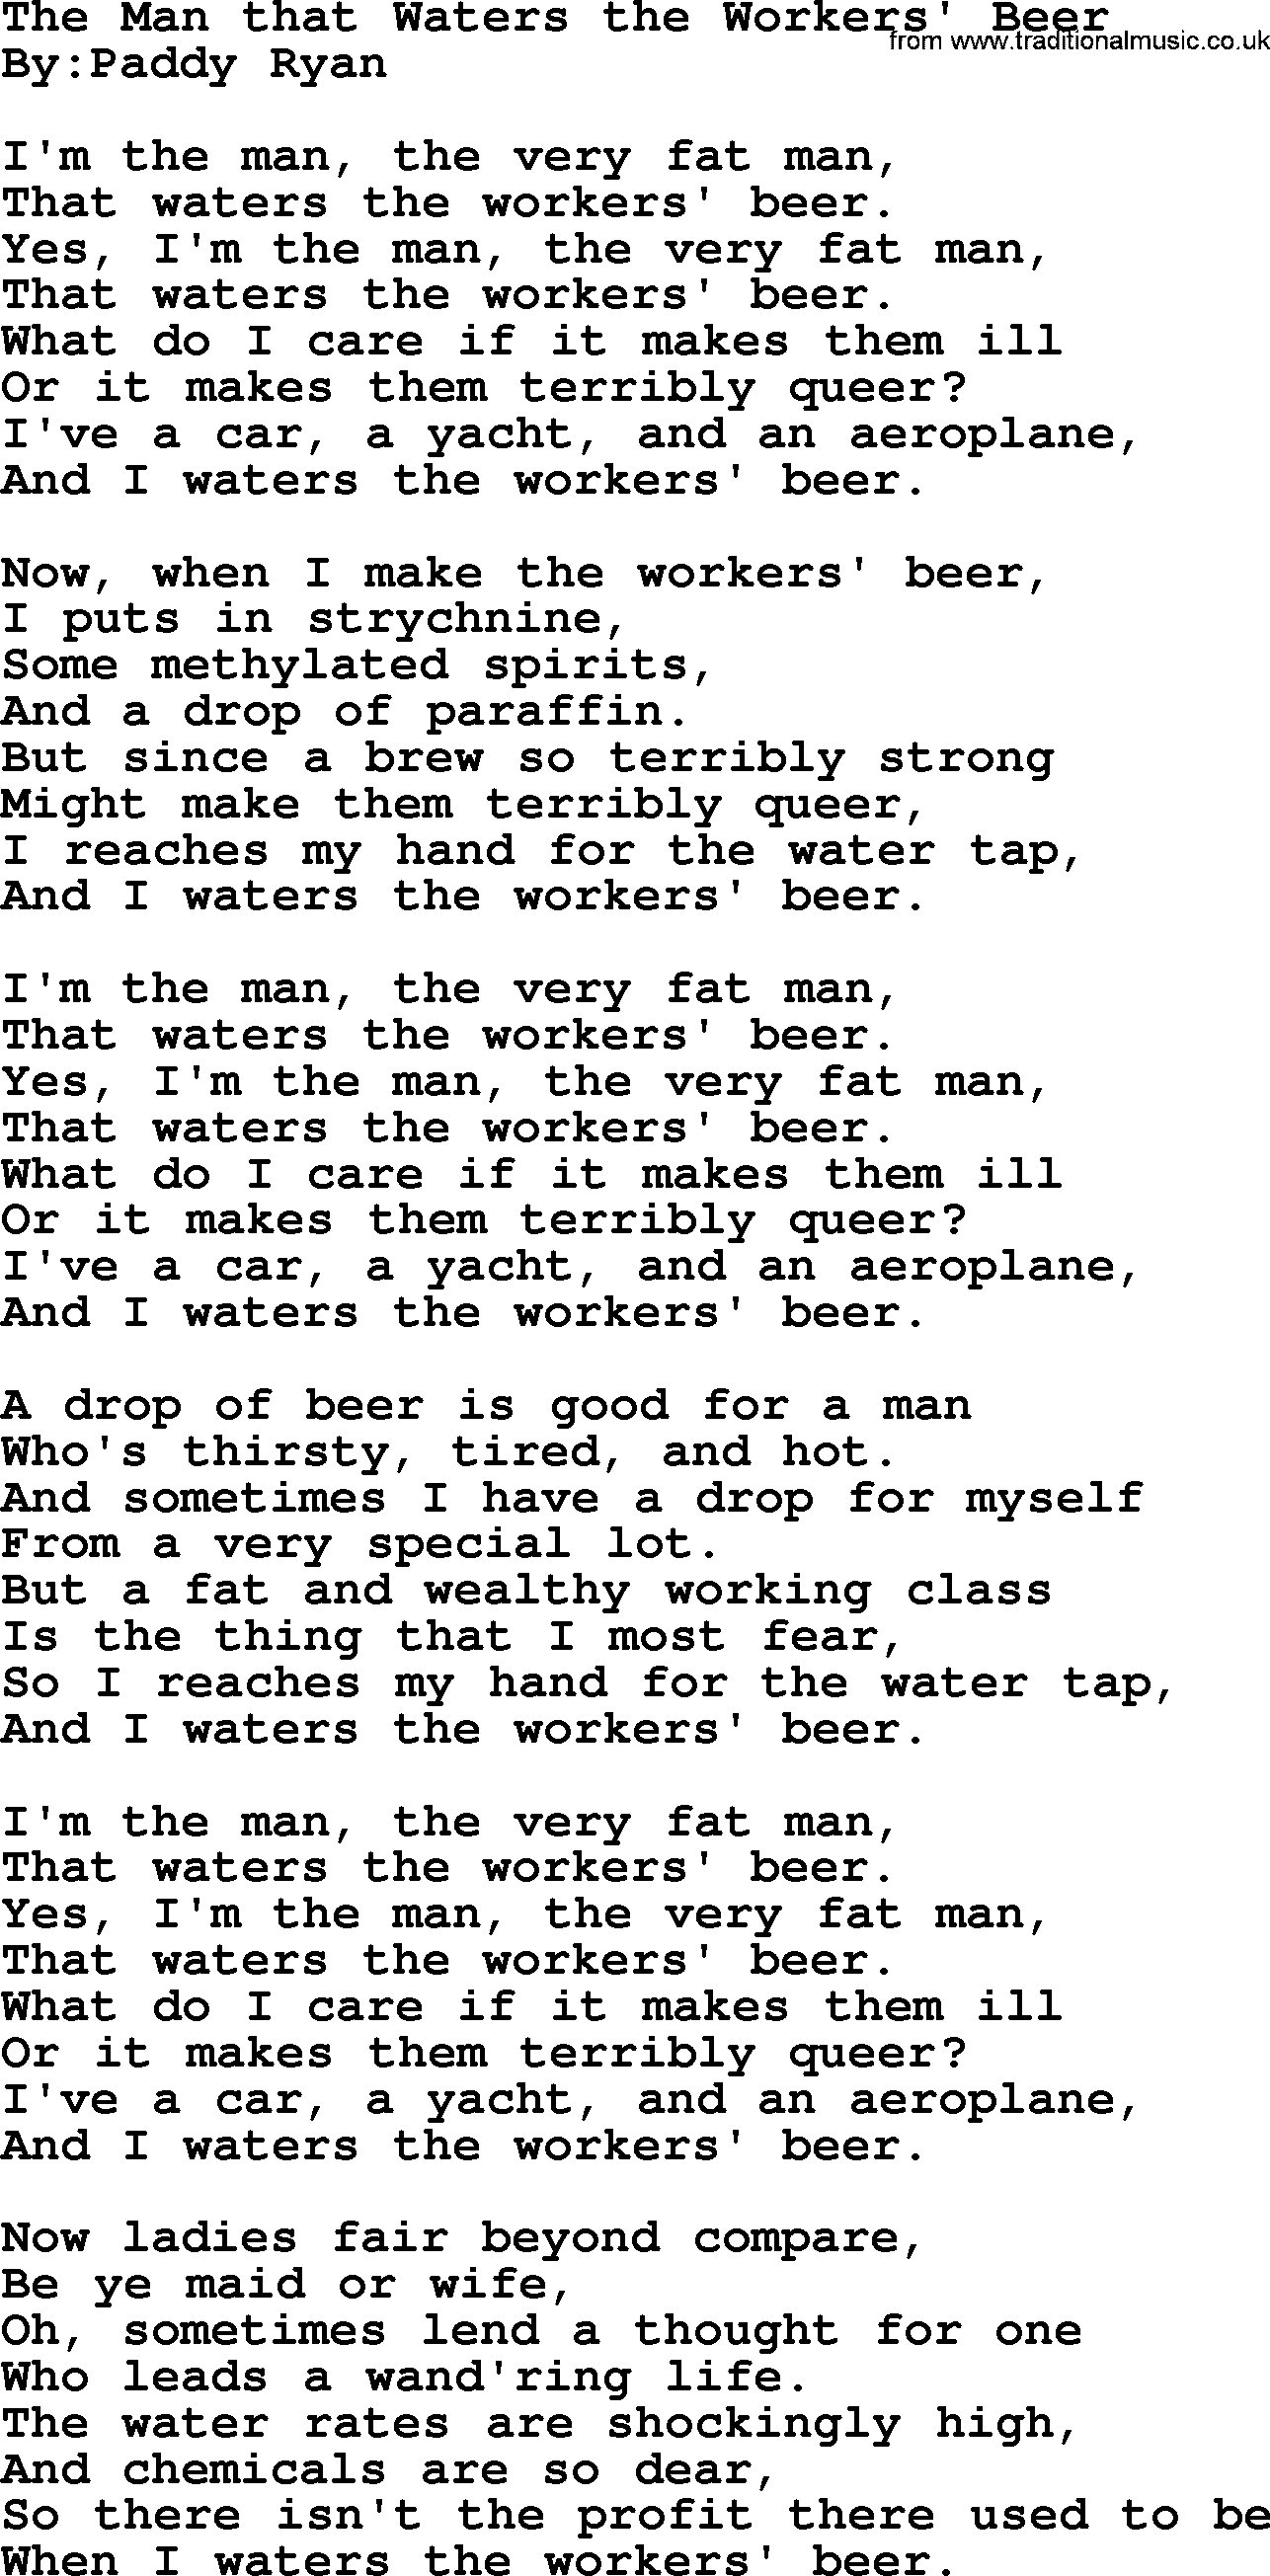 Political, Solidarity, Workers or Union song: The Man That Waters The Workers Beer, lyrics